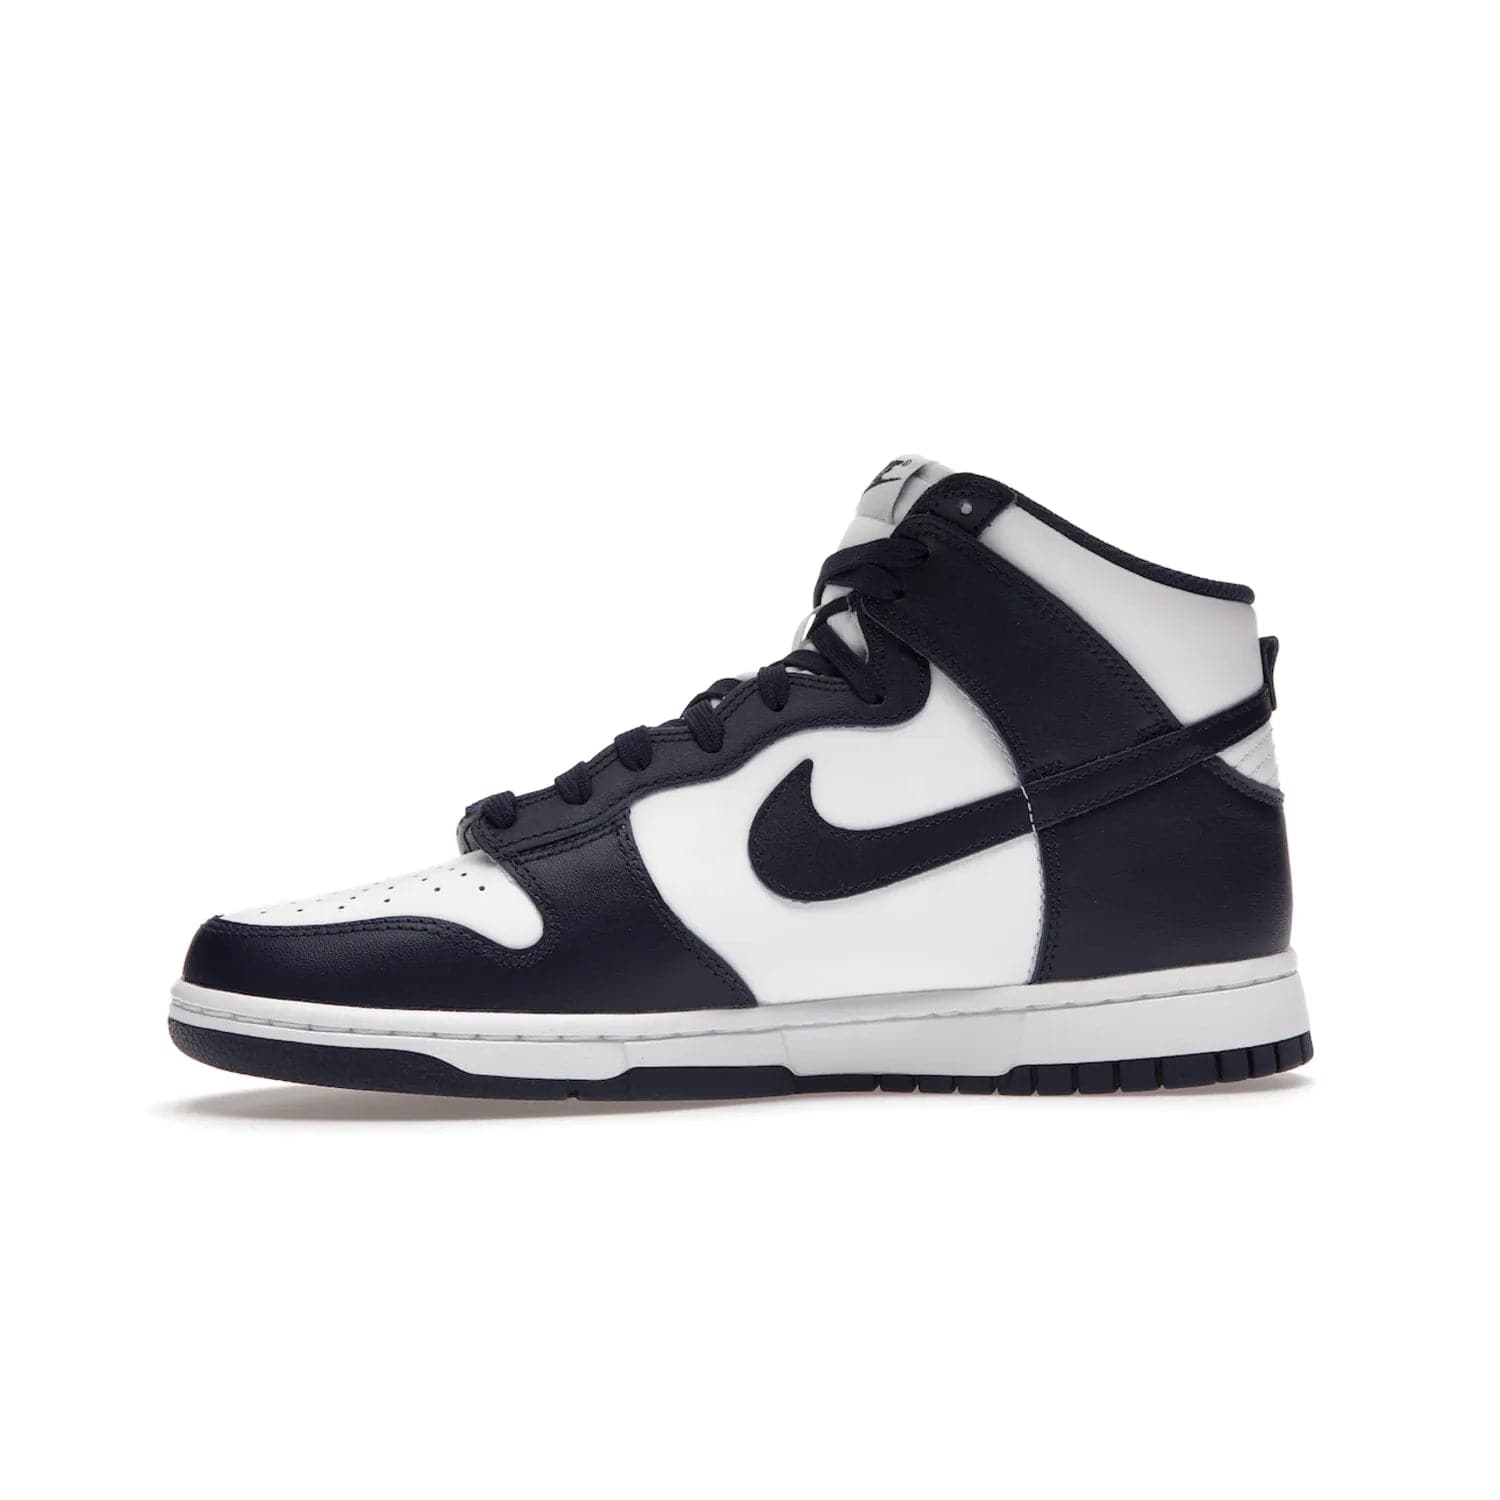 Nike Dunk High Championship Navy - Image 18 - Only at www.BallersClubKickz.com - Classic Nike Dunk High sneaker delivers an unforgettable style with white leather upper, Championship Navy overlays, and matching woven tongue label and sole. Make a statement with the Championship Navy today.